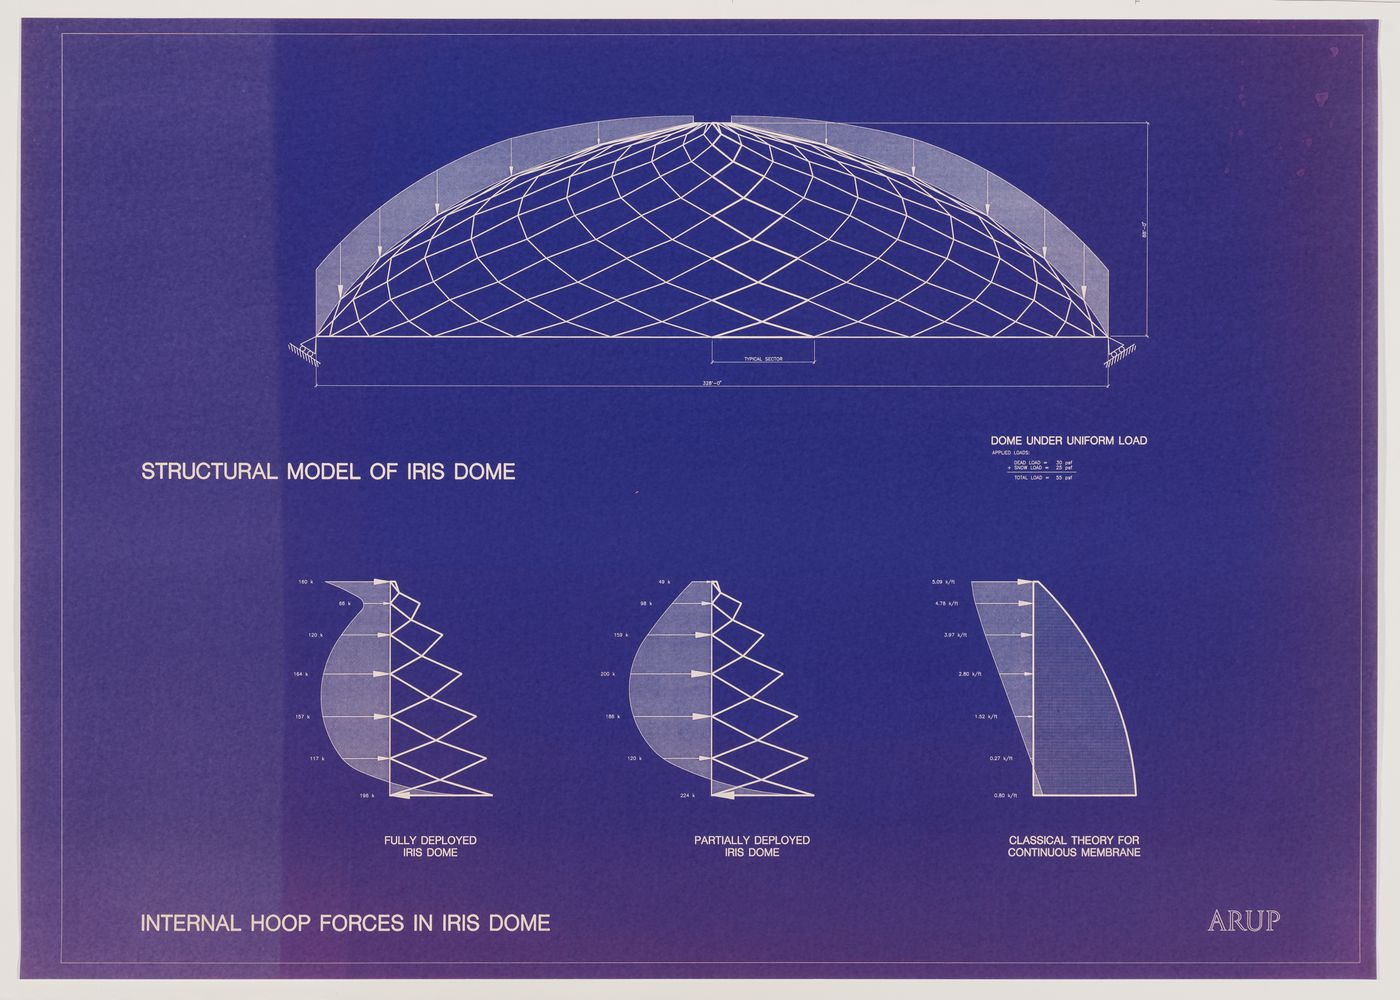 Structural model of Iris Dome showing internal hoop forces